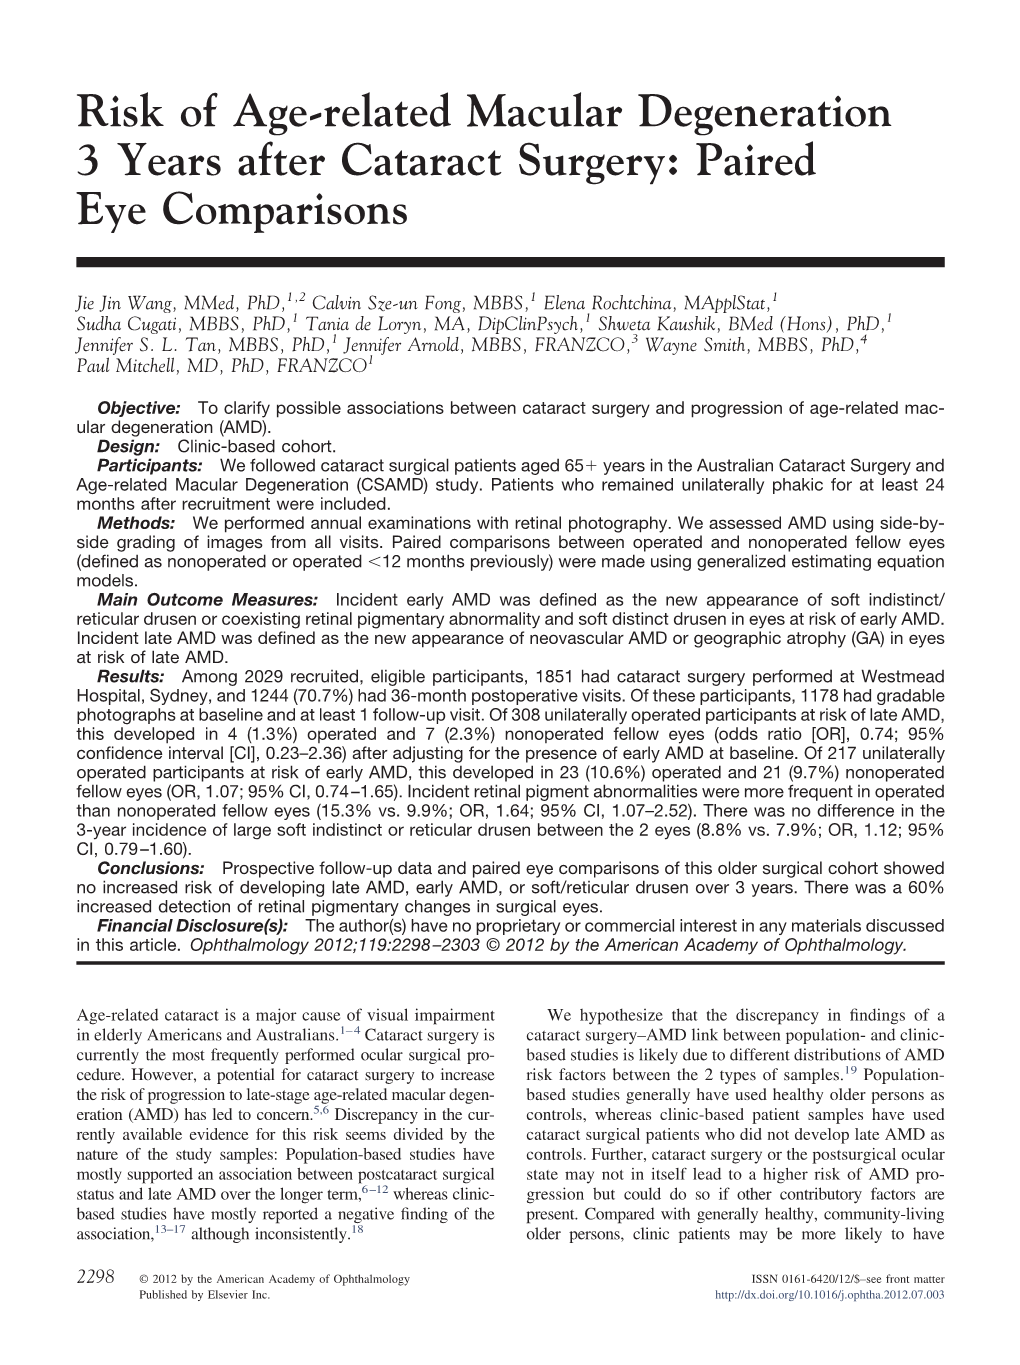 Risk of Age-Related Macular Degeneration 3 Years After Cataract Surgery: Paired Eye Comparisons